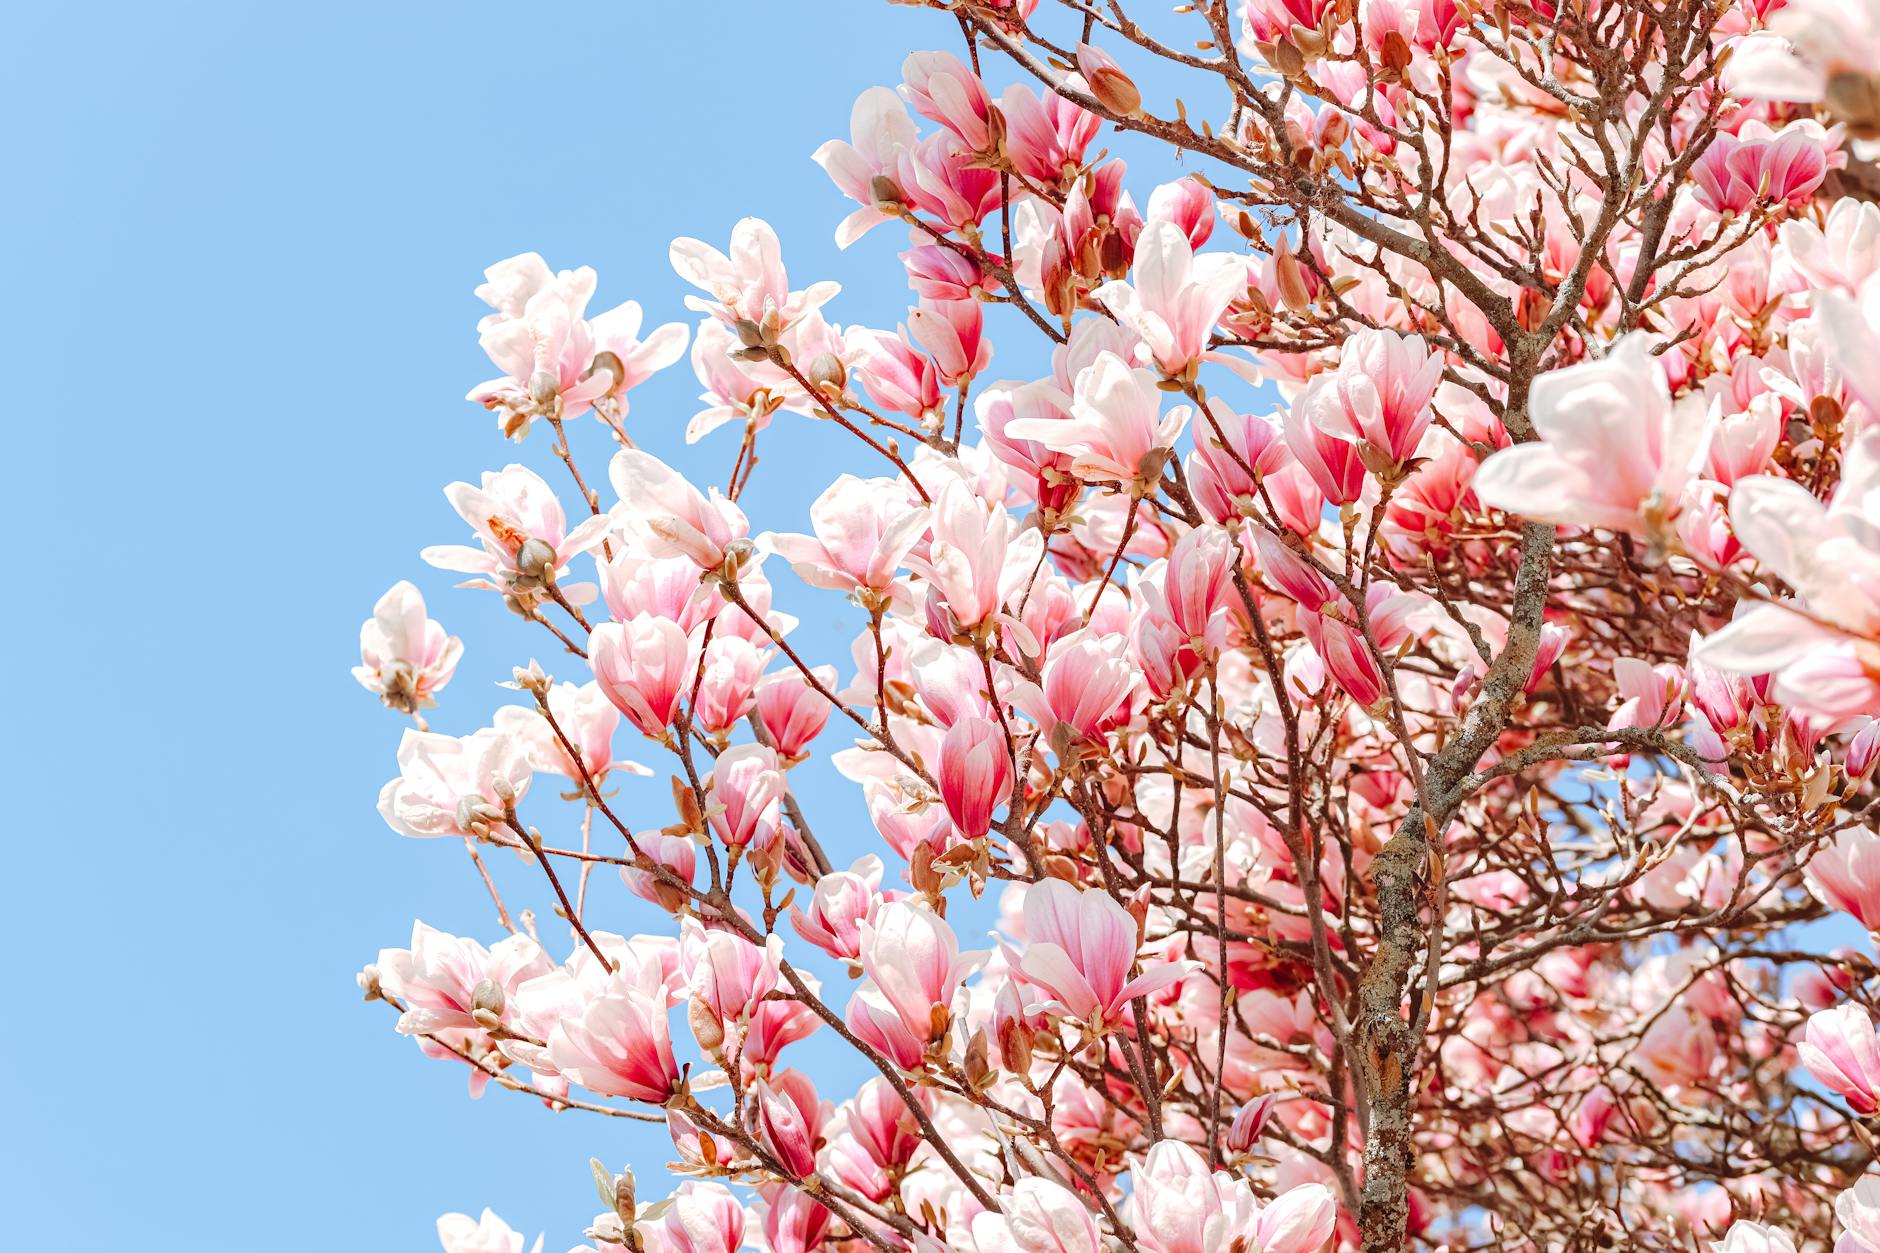 Happy Spring: The Perfect Time to align Your Values and career